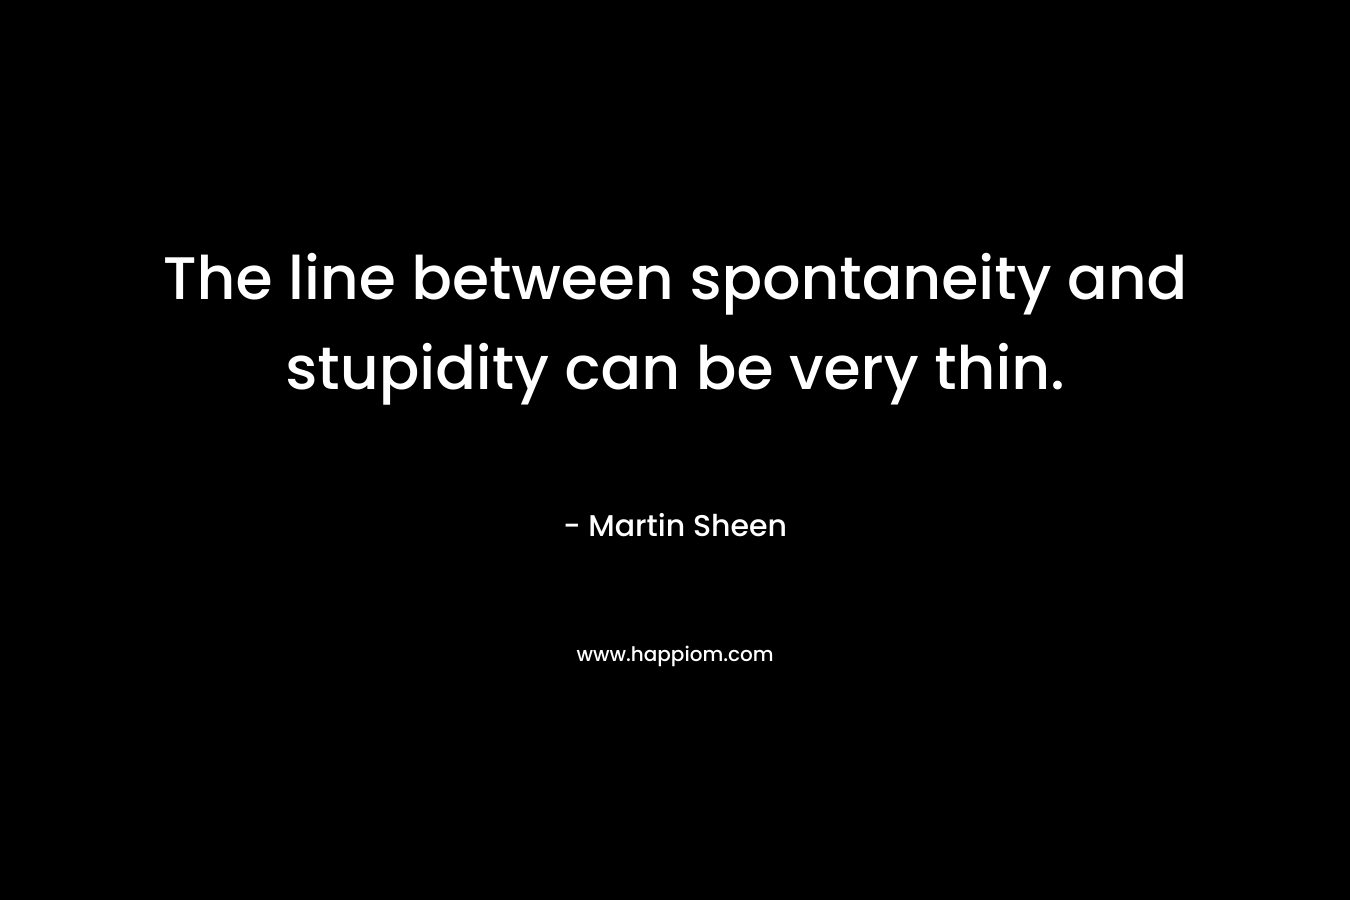 The line between spontaneity and stupidity can be very thin. – Martin Sheen